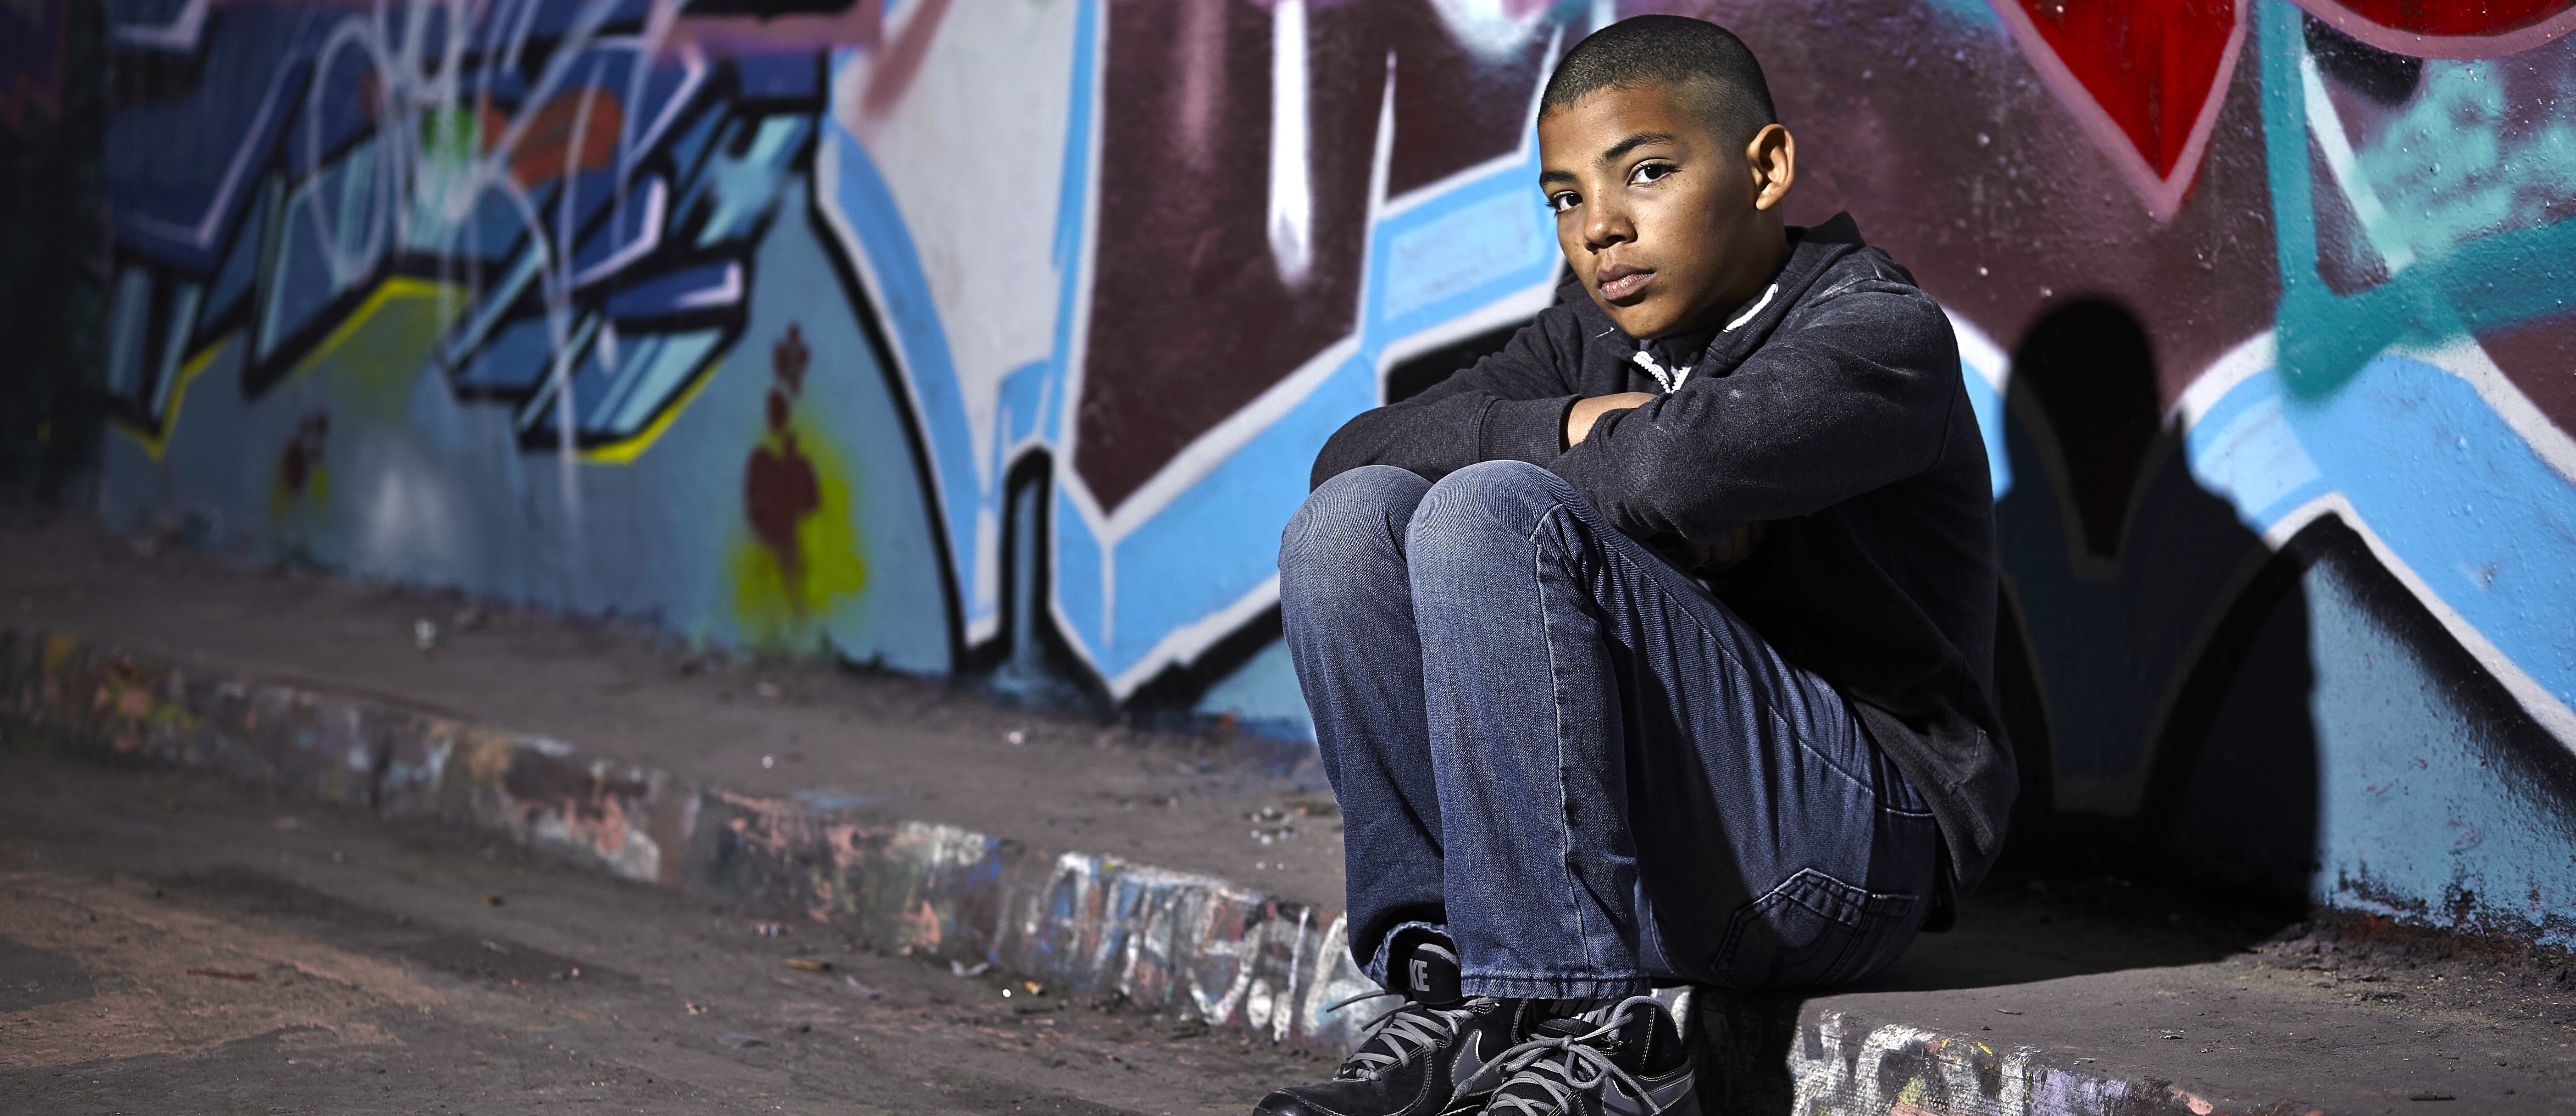 Boy sat on the floor of an alleyway in front of a graffiti wall